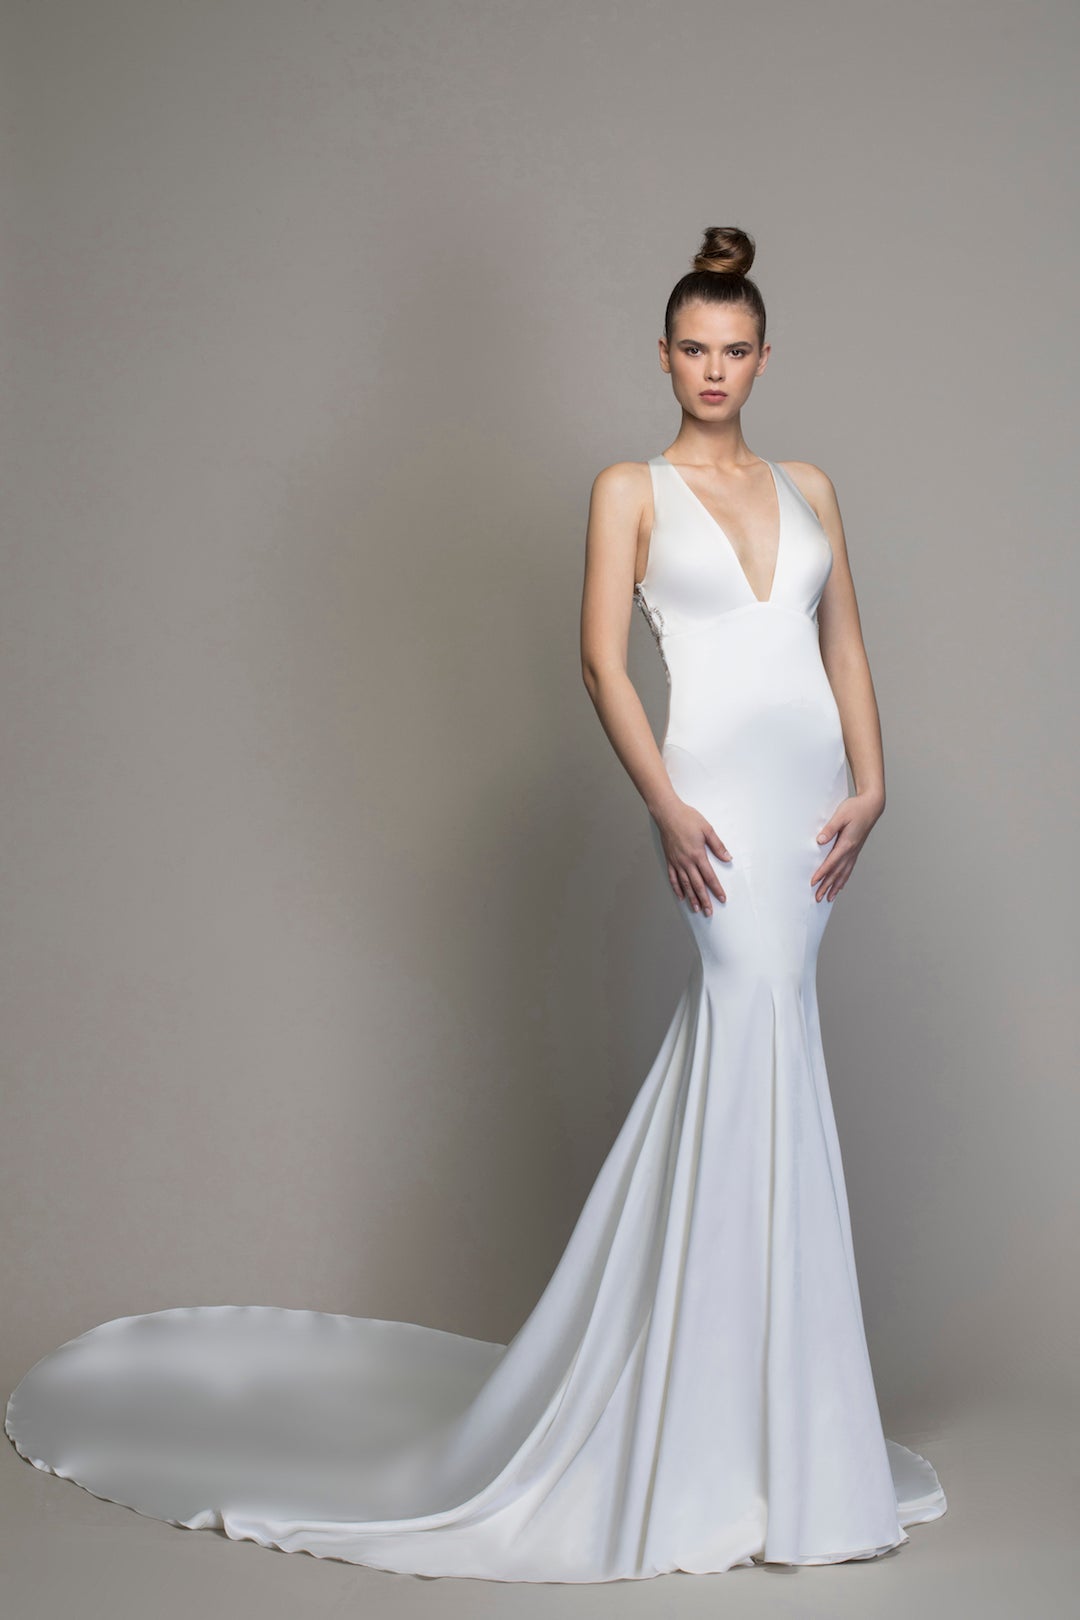 Pnina Tornai's new LOVE 2020 Collection is out! This is style 14764